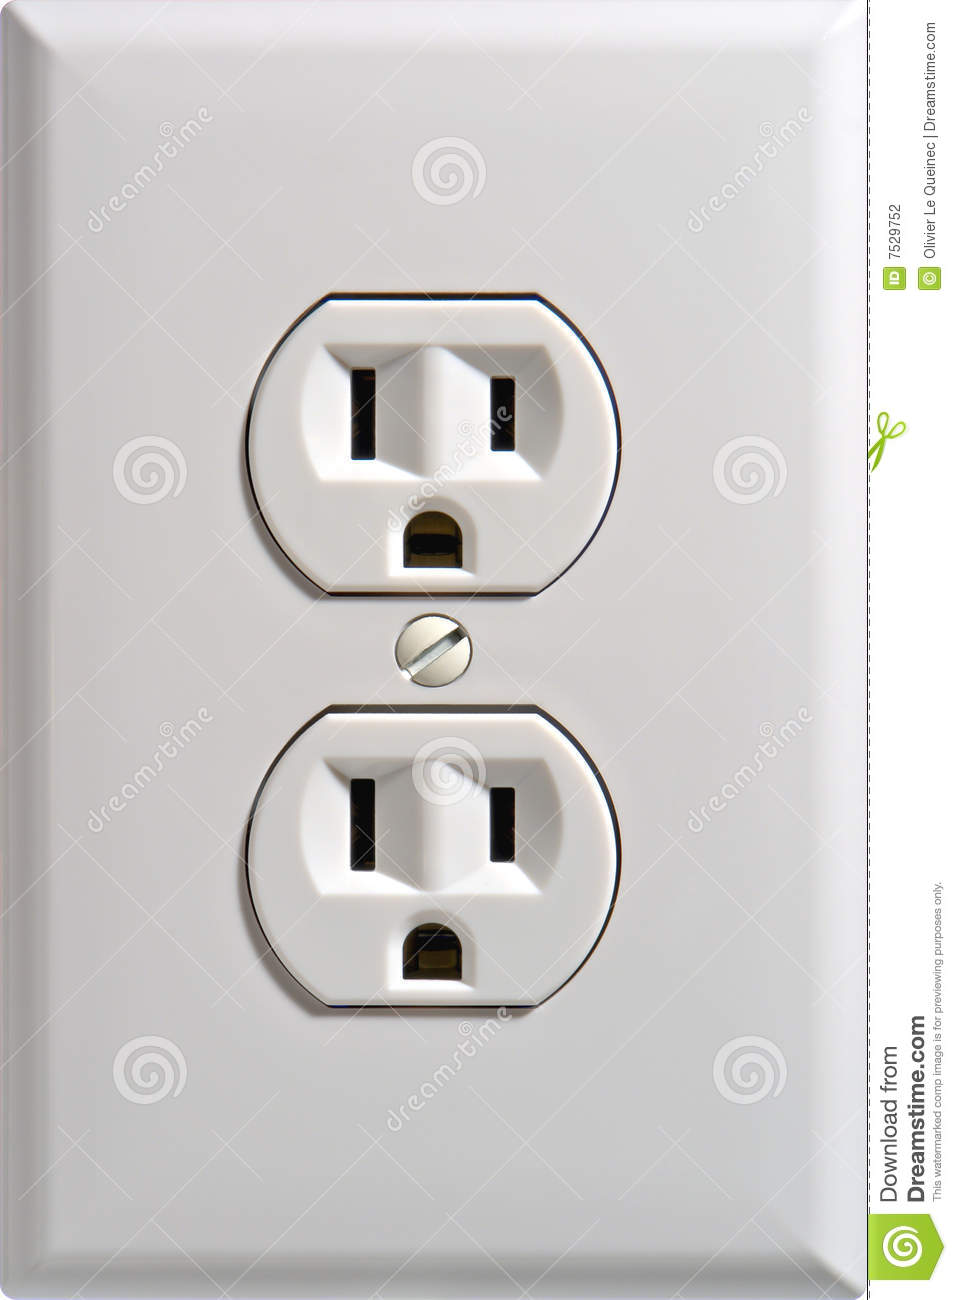 North American Standard 110 Volt Electric Wall Power Outlet Socket